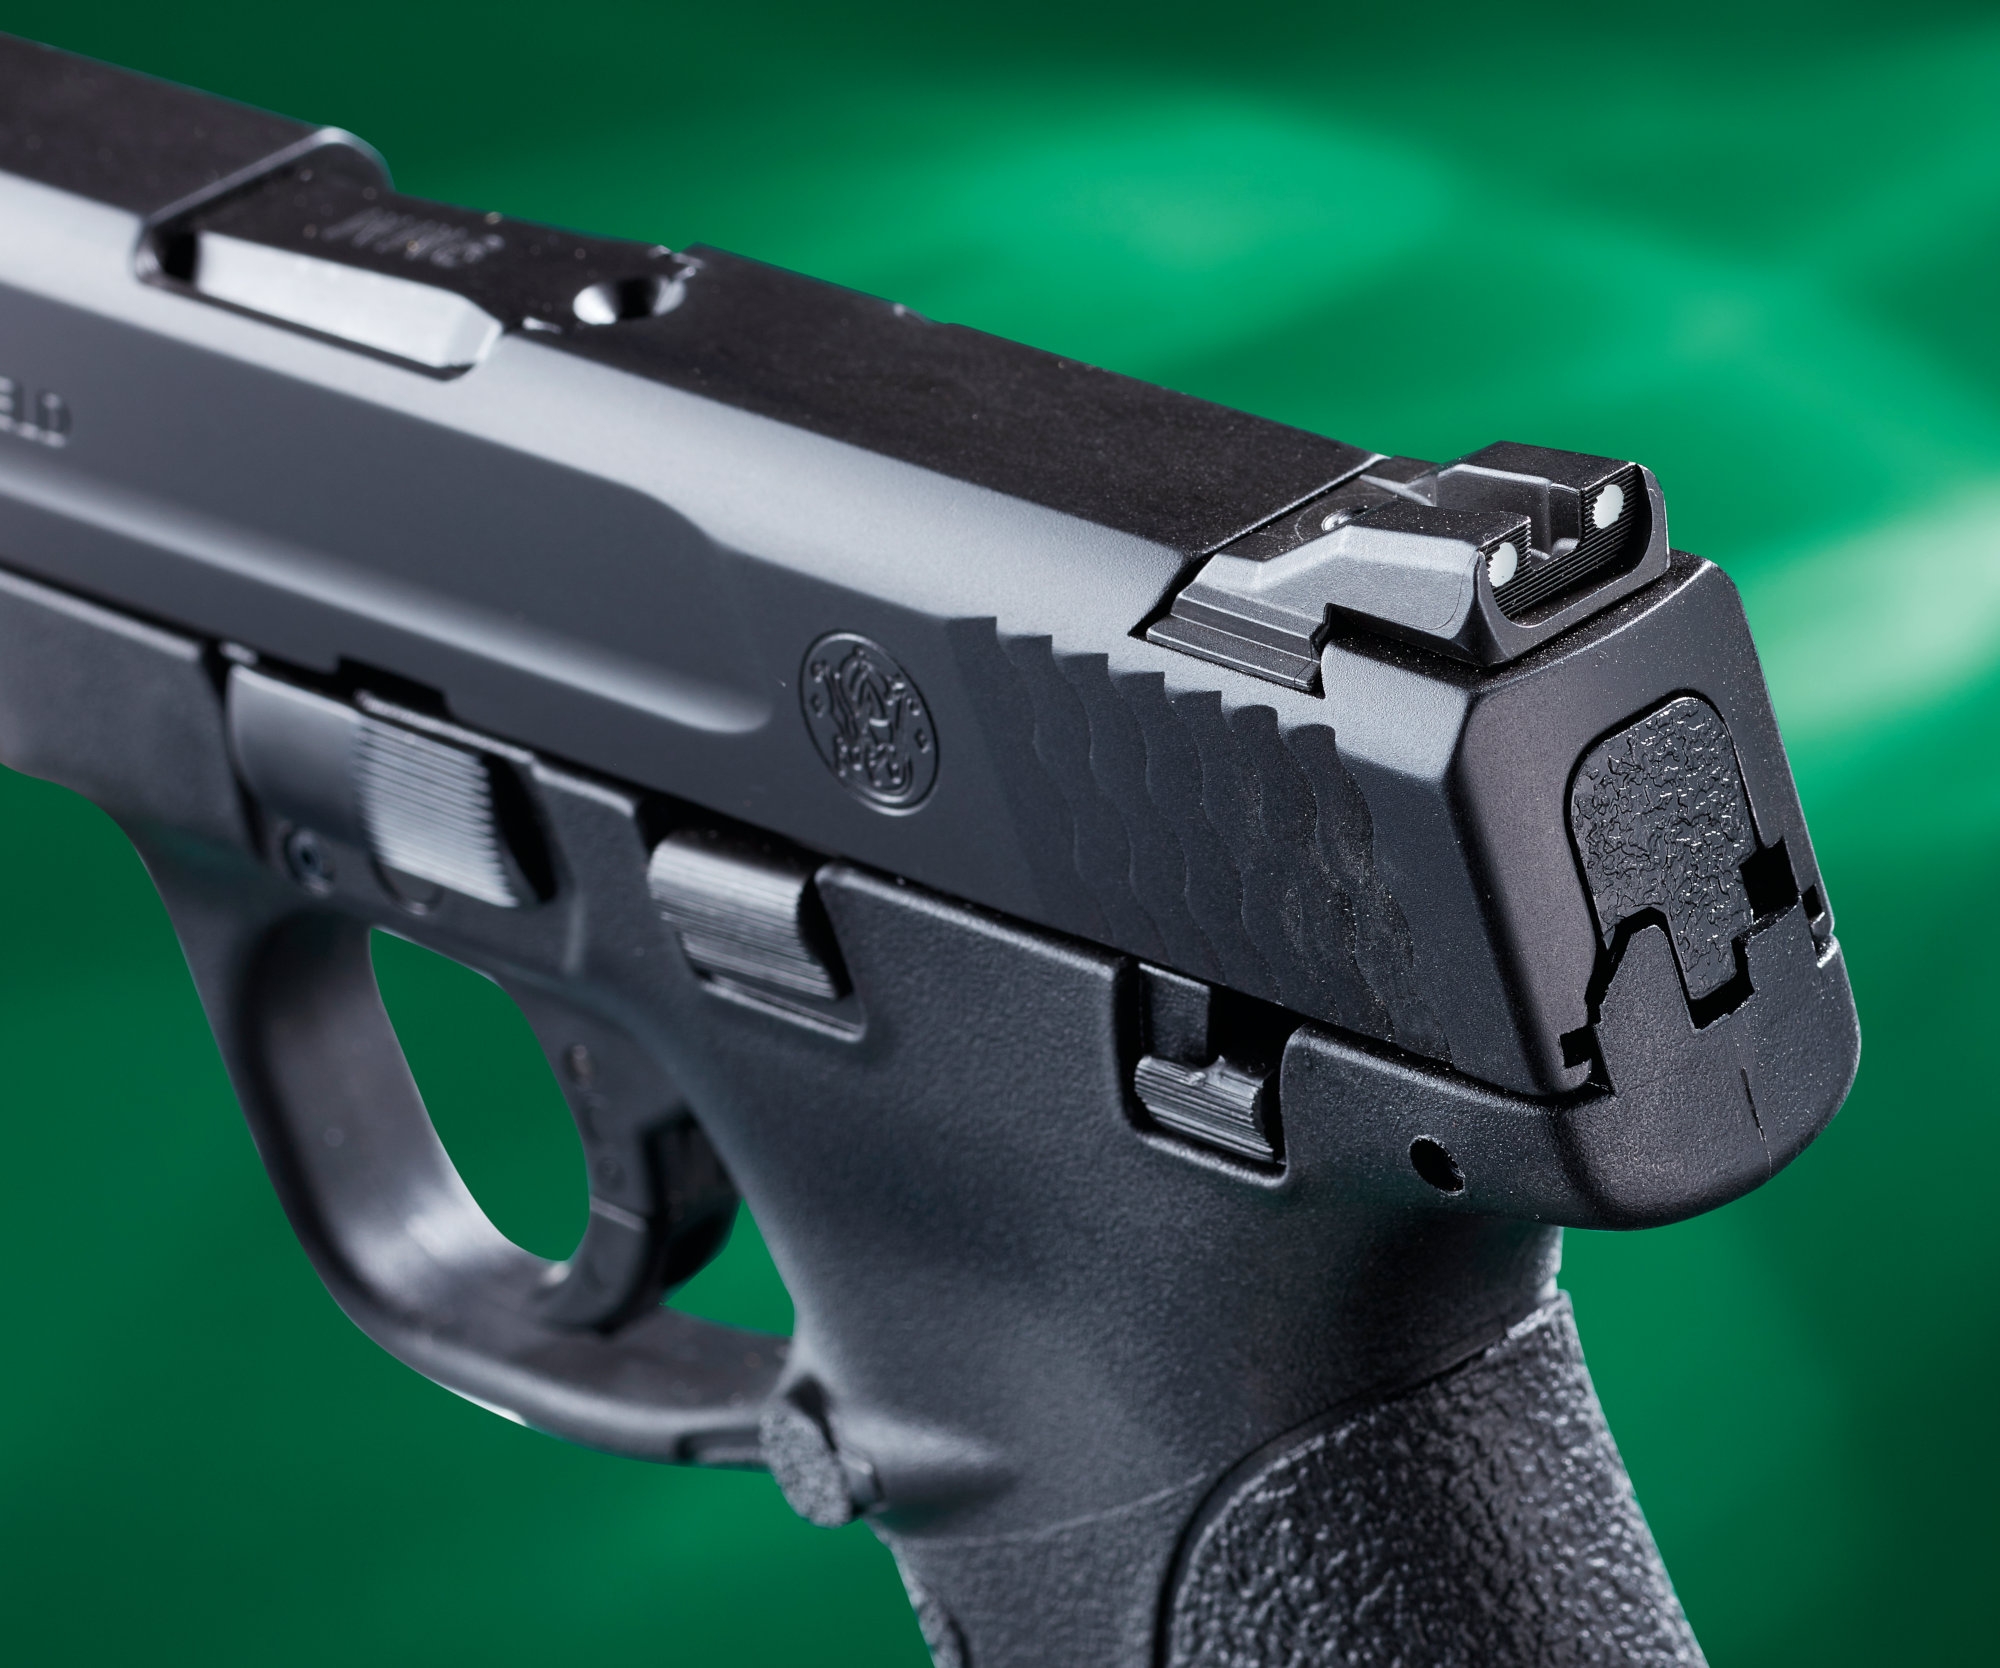 Shield 9. Smith & Wesson m&p9. Полимерные пистолеты. Smith & Wesson m&p overhauled by ed Brown.